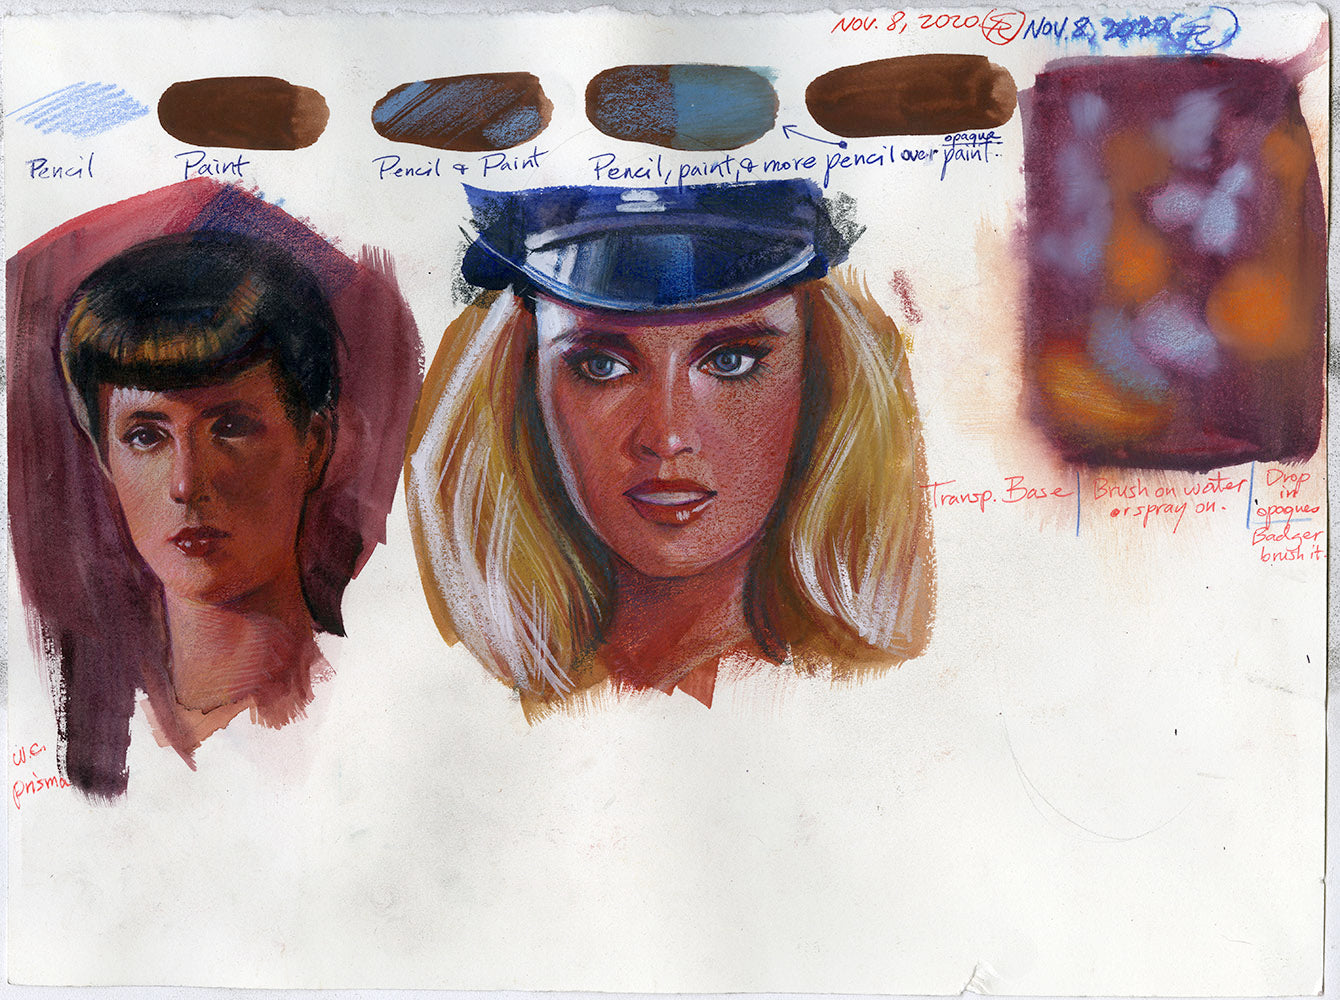 Hand with Stone and Face study/ Police Academy- Copies of Drew Struzan double sided